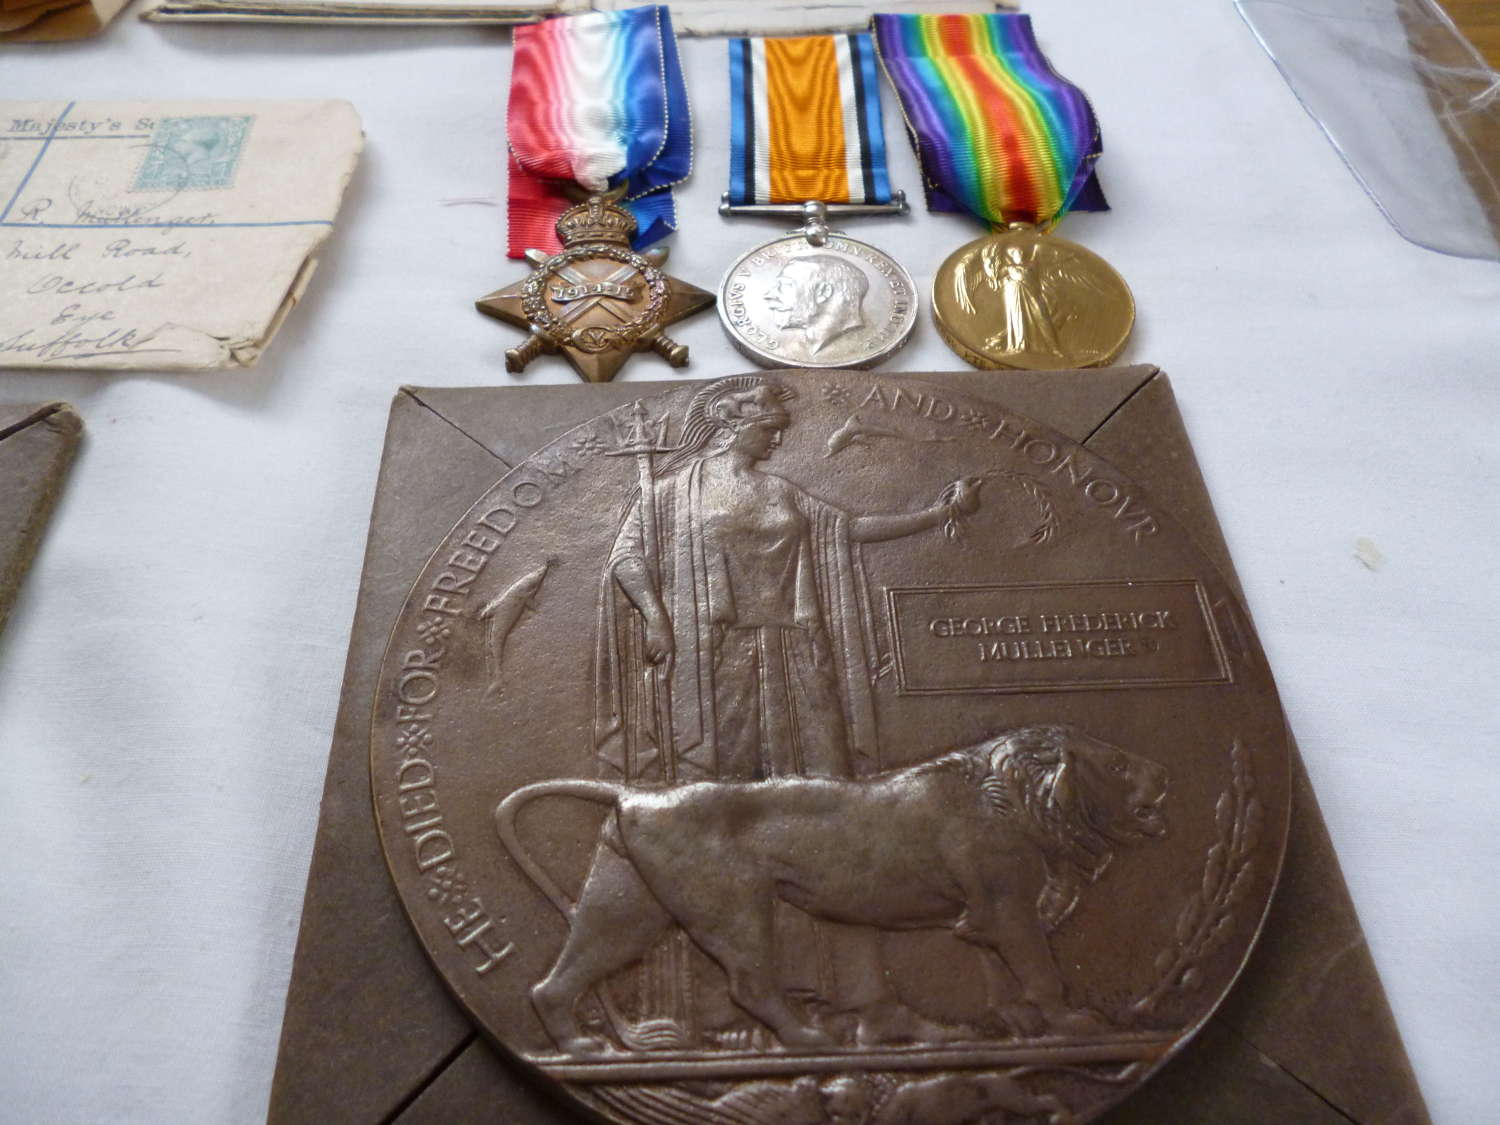 Brothers Casualty Medals Suffolk Regiment